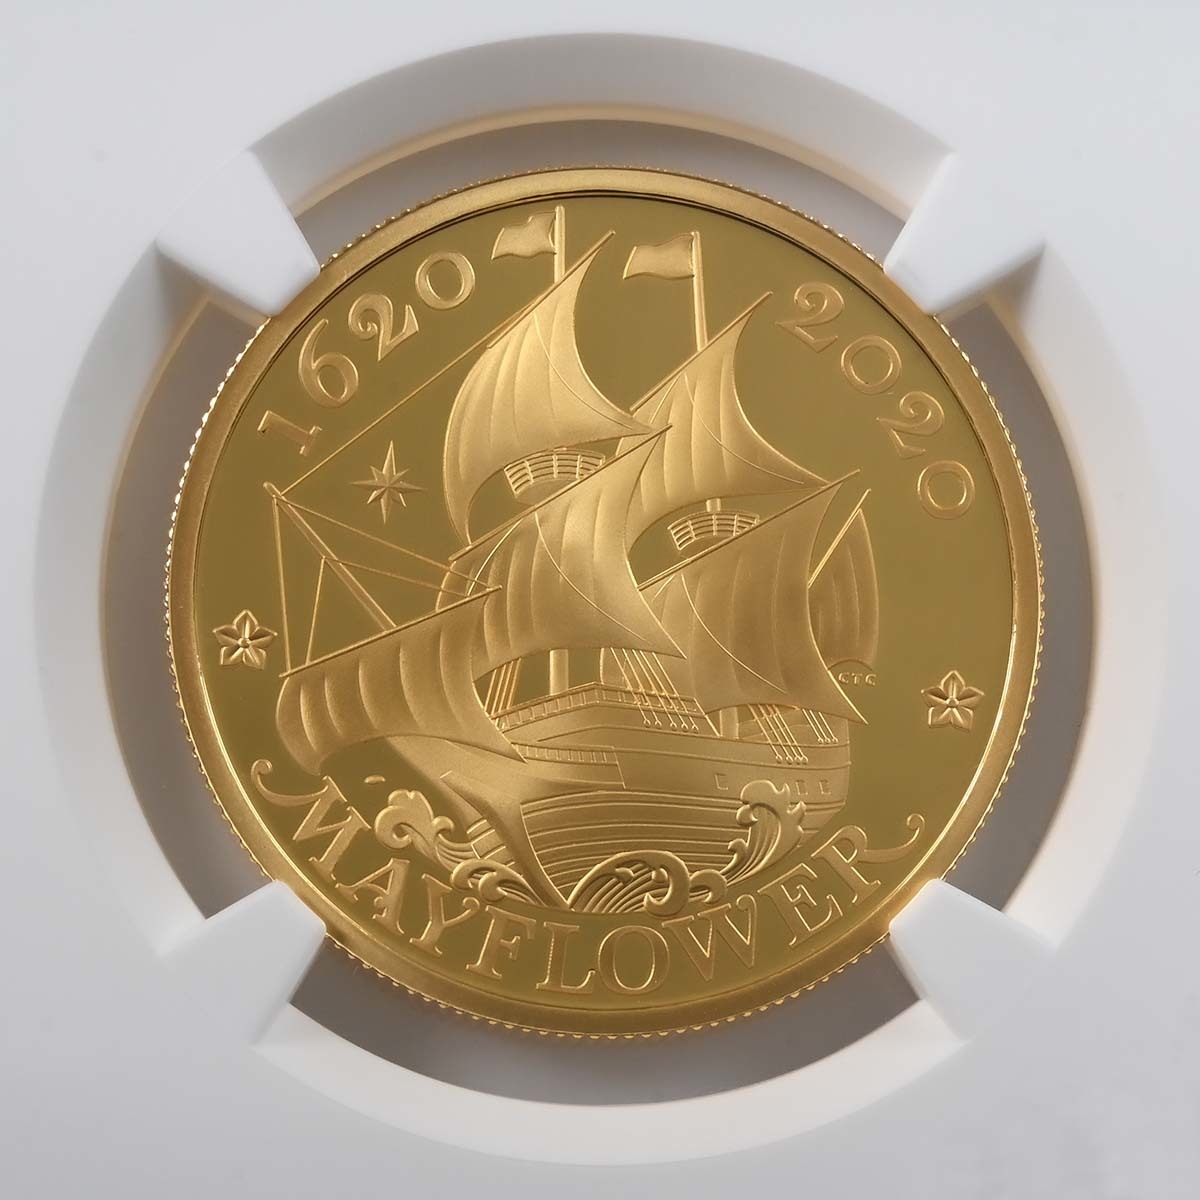 UK20MAGP 2020 Mayflower 1 Ounce Gold Proof PF 70 First Day Reverse